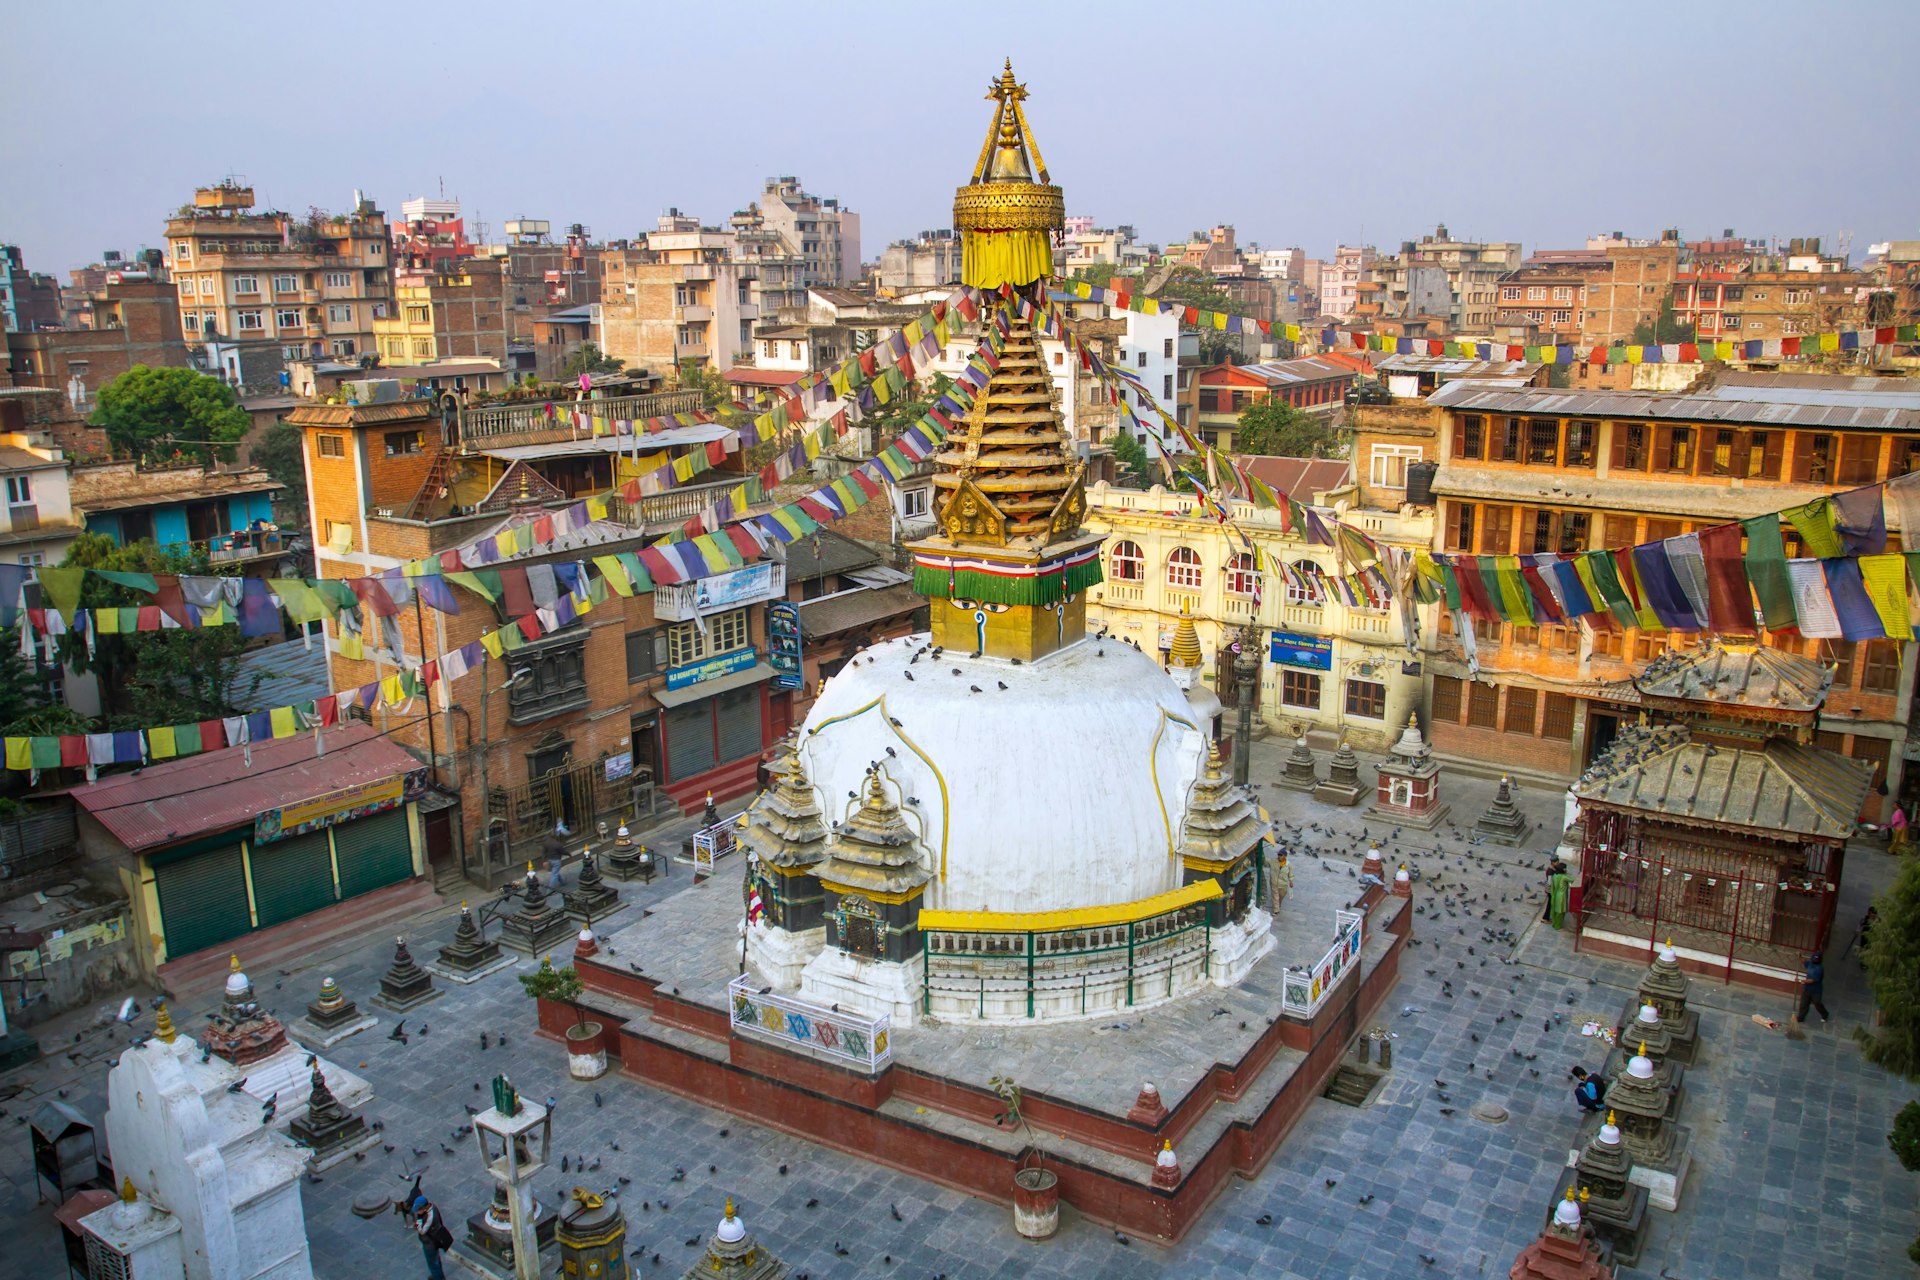 A golden stupa with colorful prayer flags in the centre of an urban area with high-rise buildings